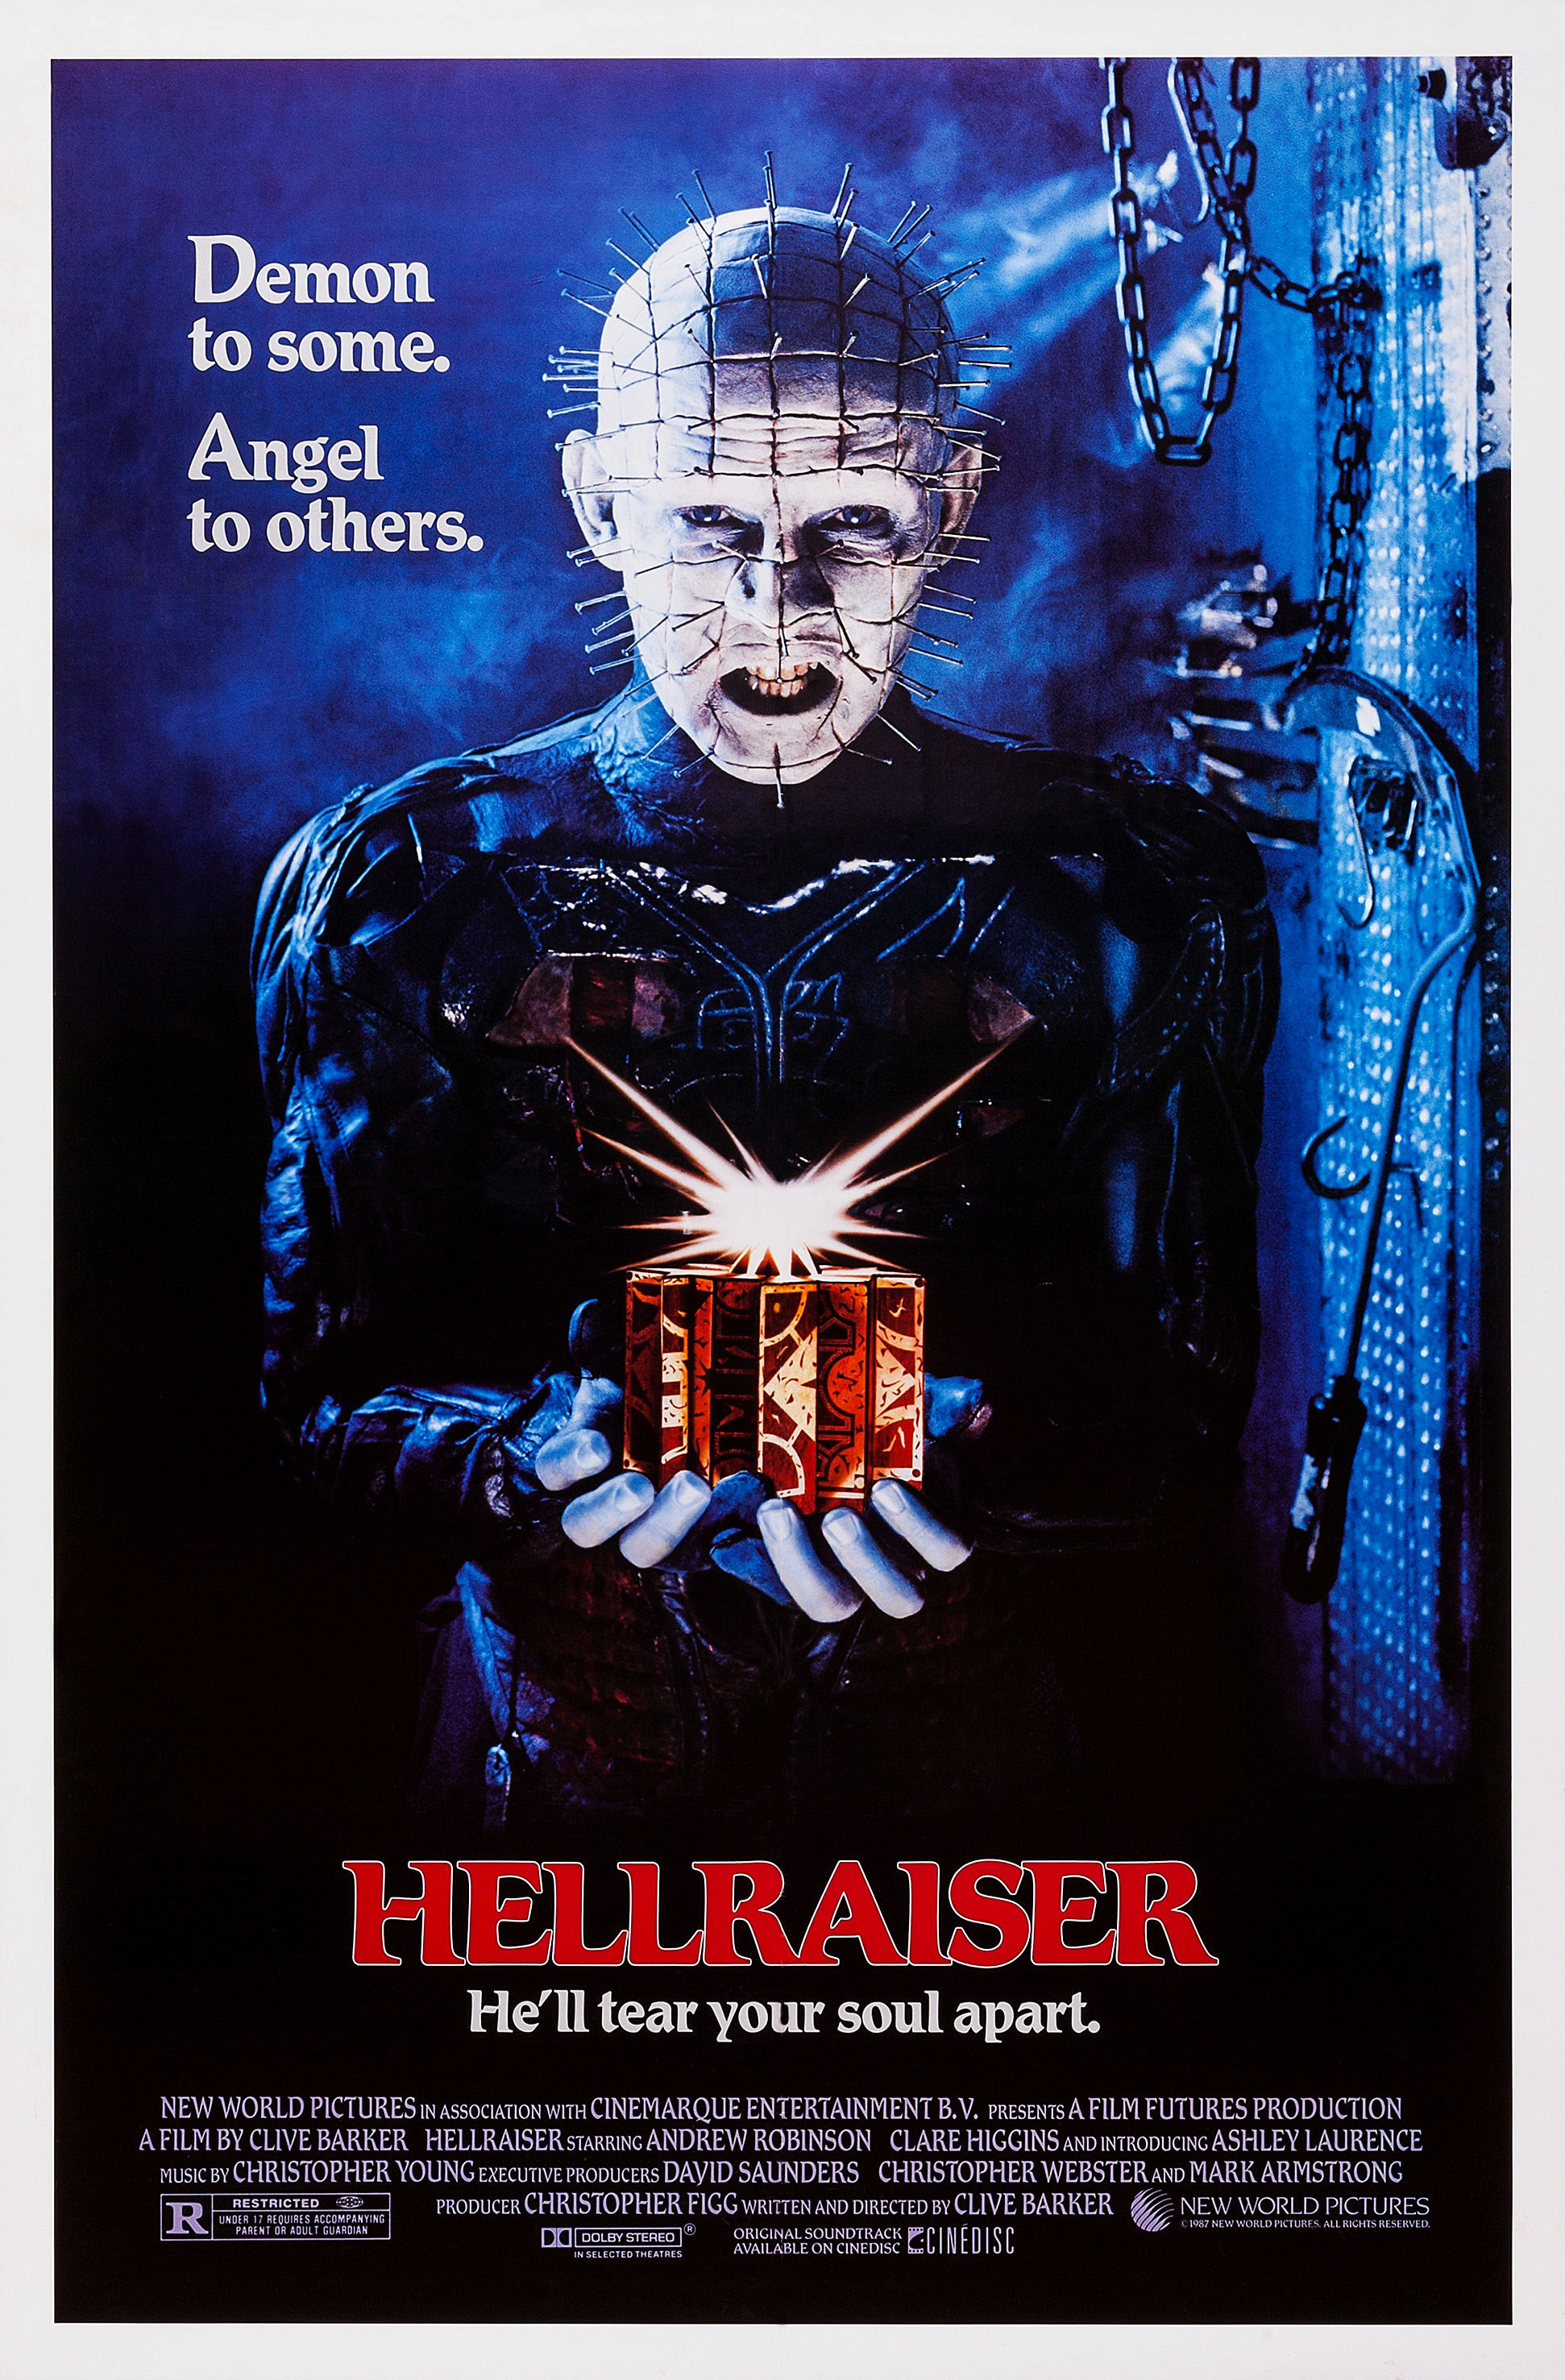 The official poster for &quot;Hellraiser&quot; which features Pinhead holding out a shiny present for you to take